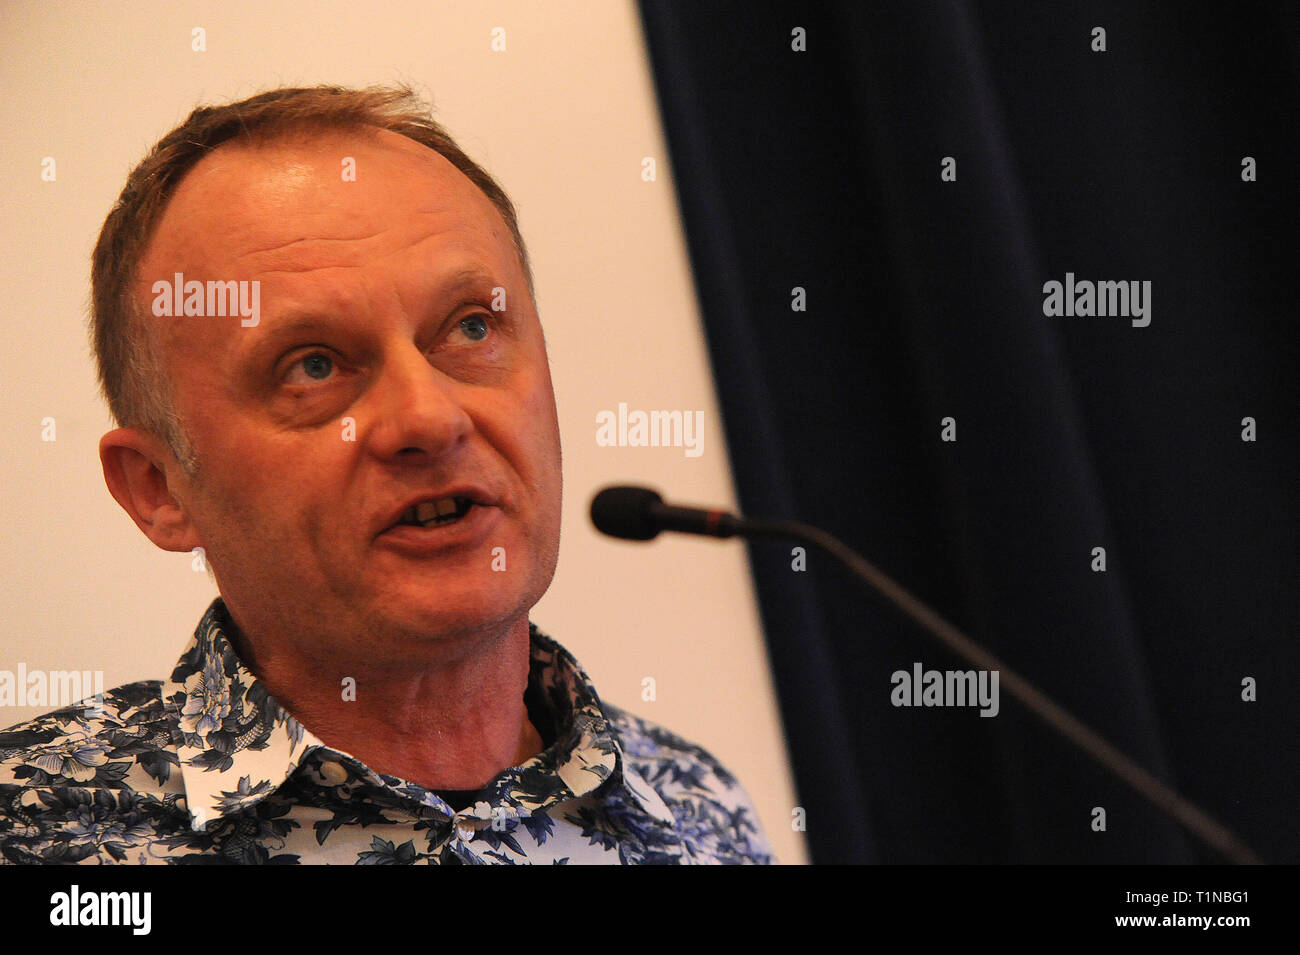 London, England. 16th March, 2019. Mike Berry, lecturer and researcher at the School of Journalism, Media and Culture at Cardiff University, speaking  Stock Photo